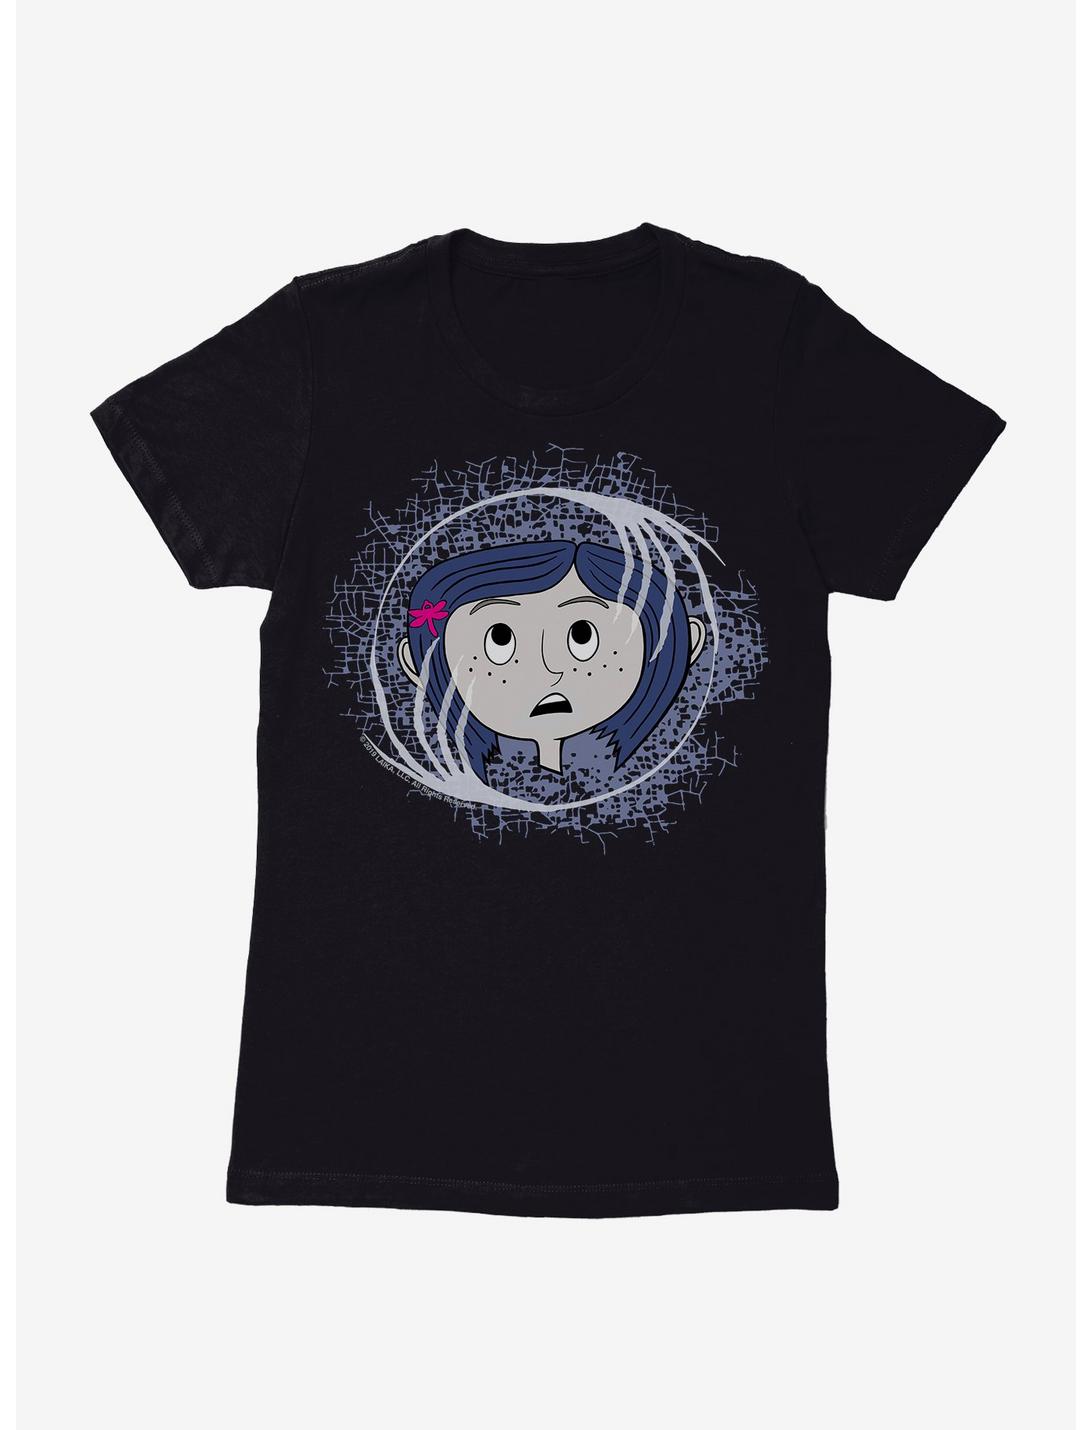 Coraline Other Mother Hands Womens T-Shirt, BLACK, hi-res